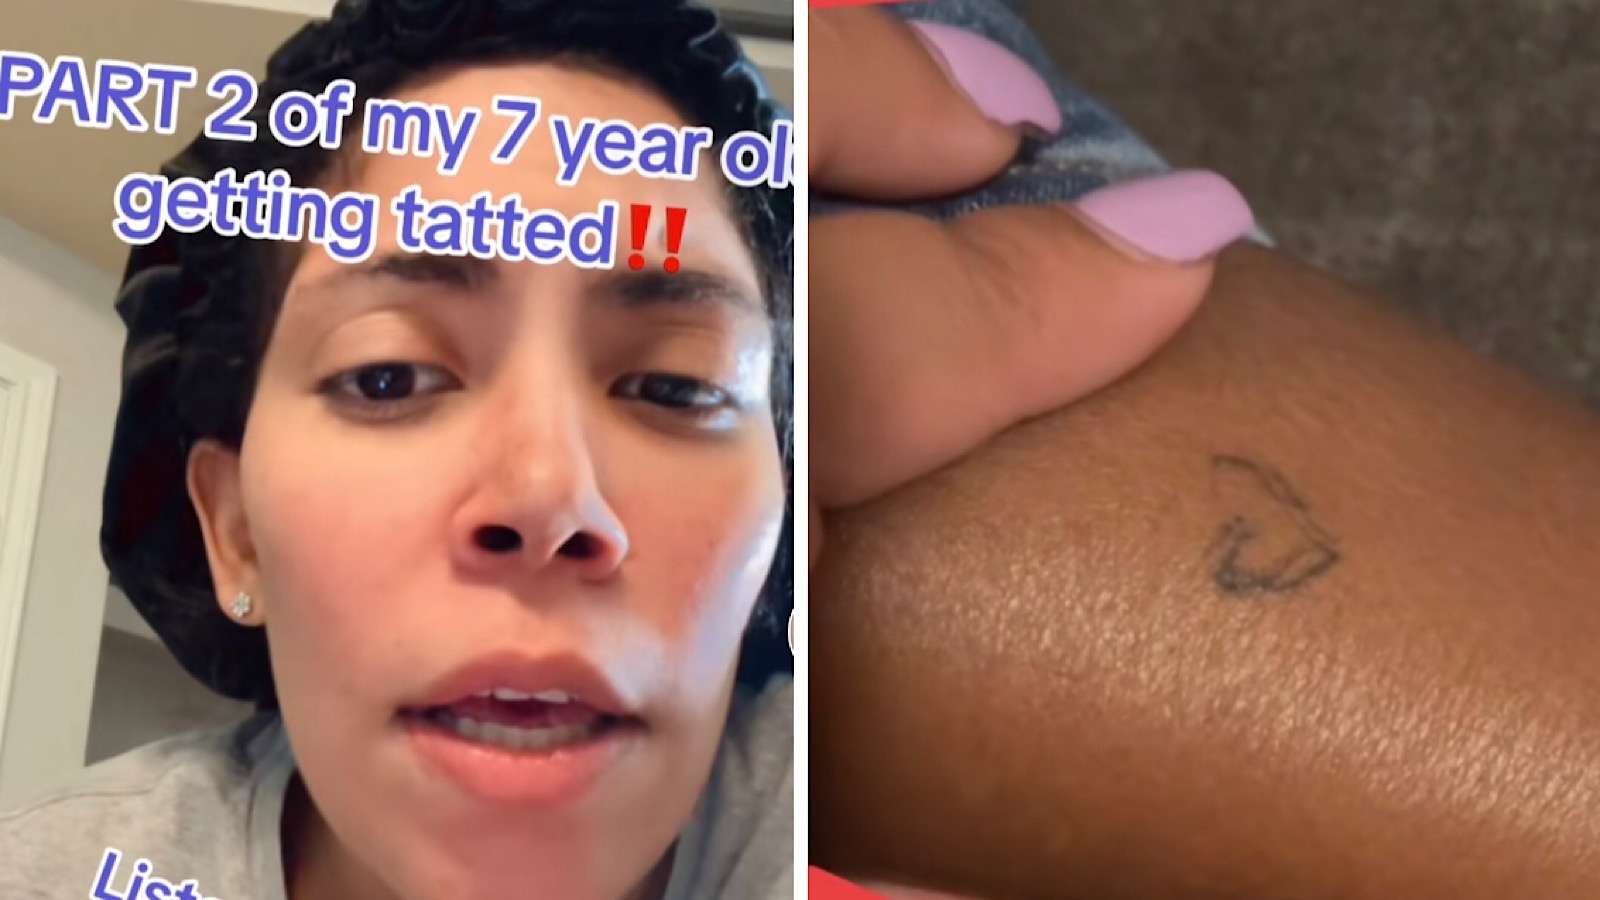 TikTok mom and 7-year-old daughter who got a tattoo illegally